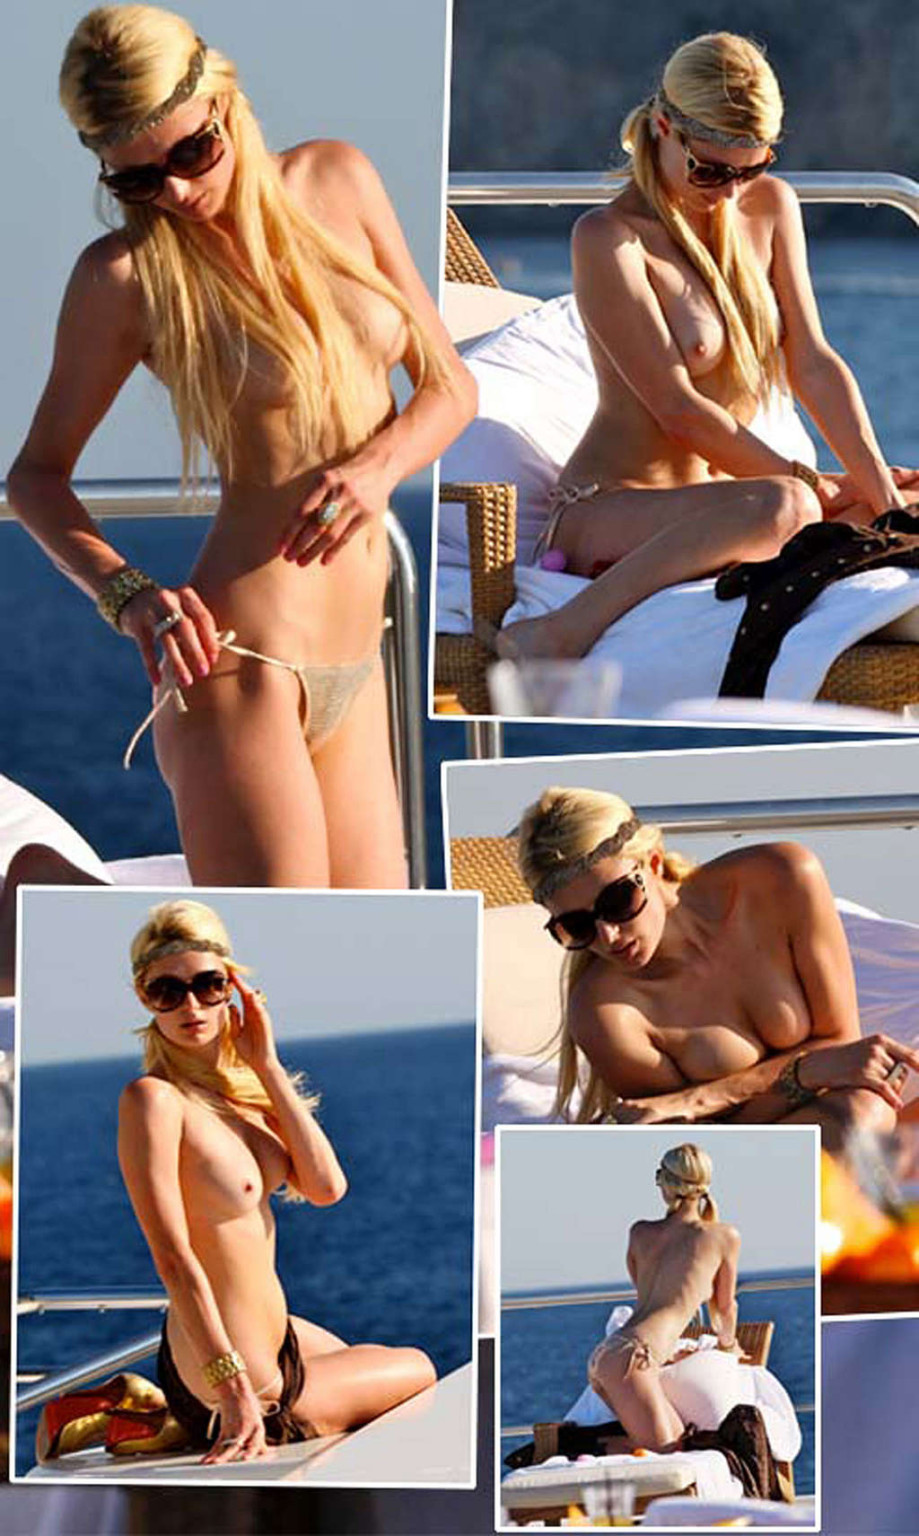 Paris Hilton Nude Beach - Paris Hilton another topless sunbathing on yach and partying in bikini on beach  Porn Pictures, XXX Photos, Sex Images #3242870 - PICTOA